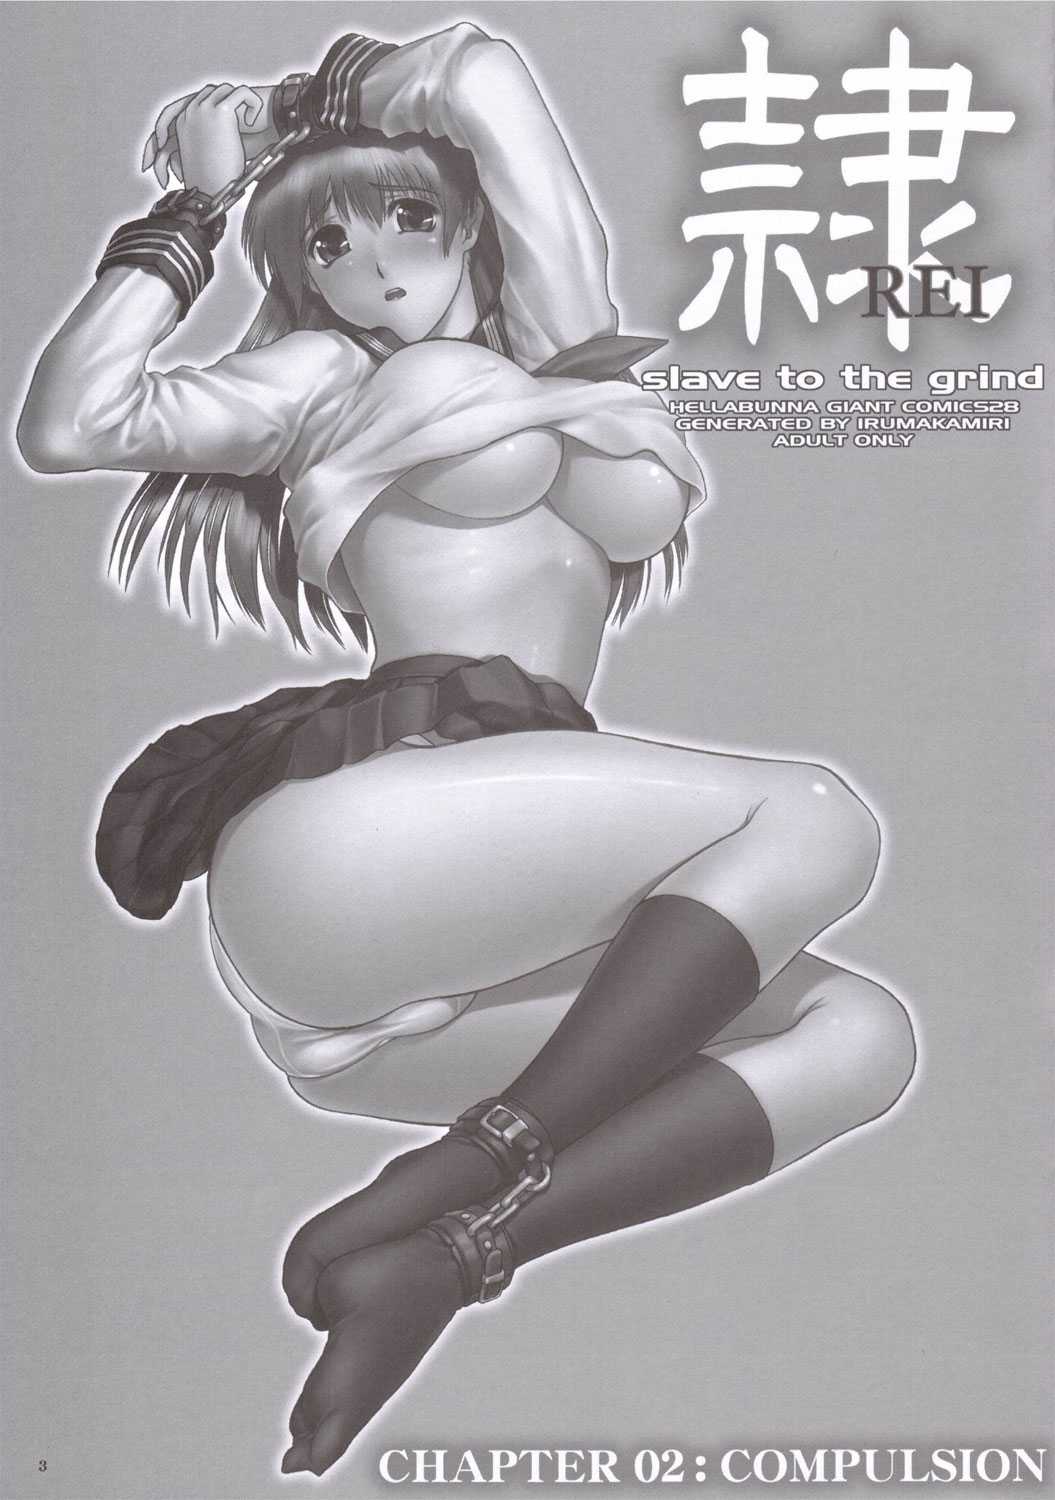 [Hellabunna] REI - slave to the grind - CHAPTER 2: COMPULSION (Dead or Alive) [へらぶな] 隷 REI - slave to the grind - CHAPTER 2: COMPULSION (デッドオアアライブ)